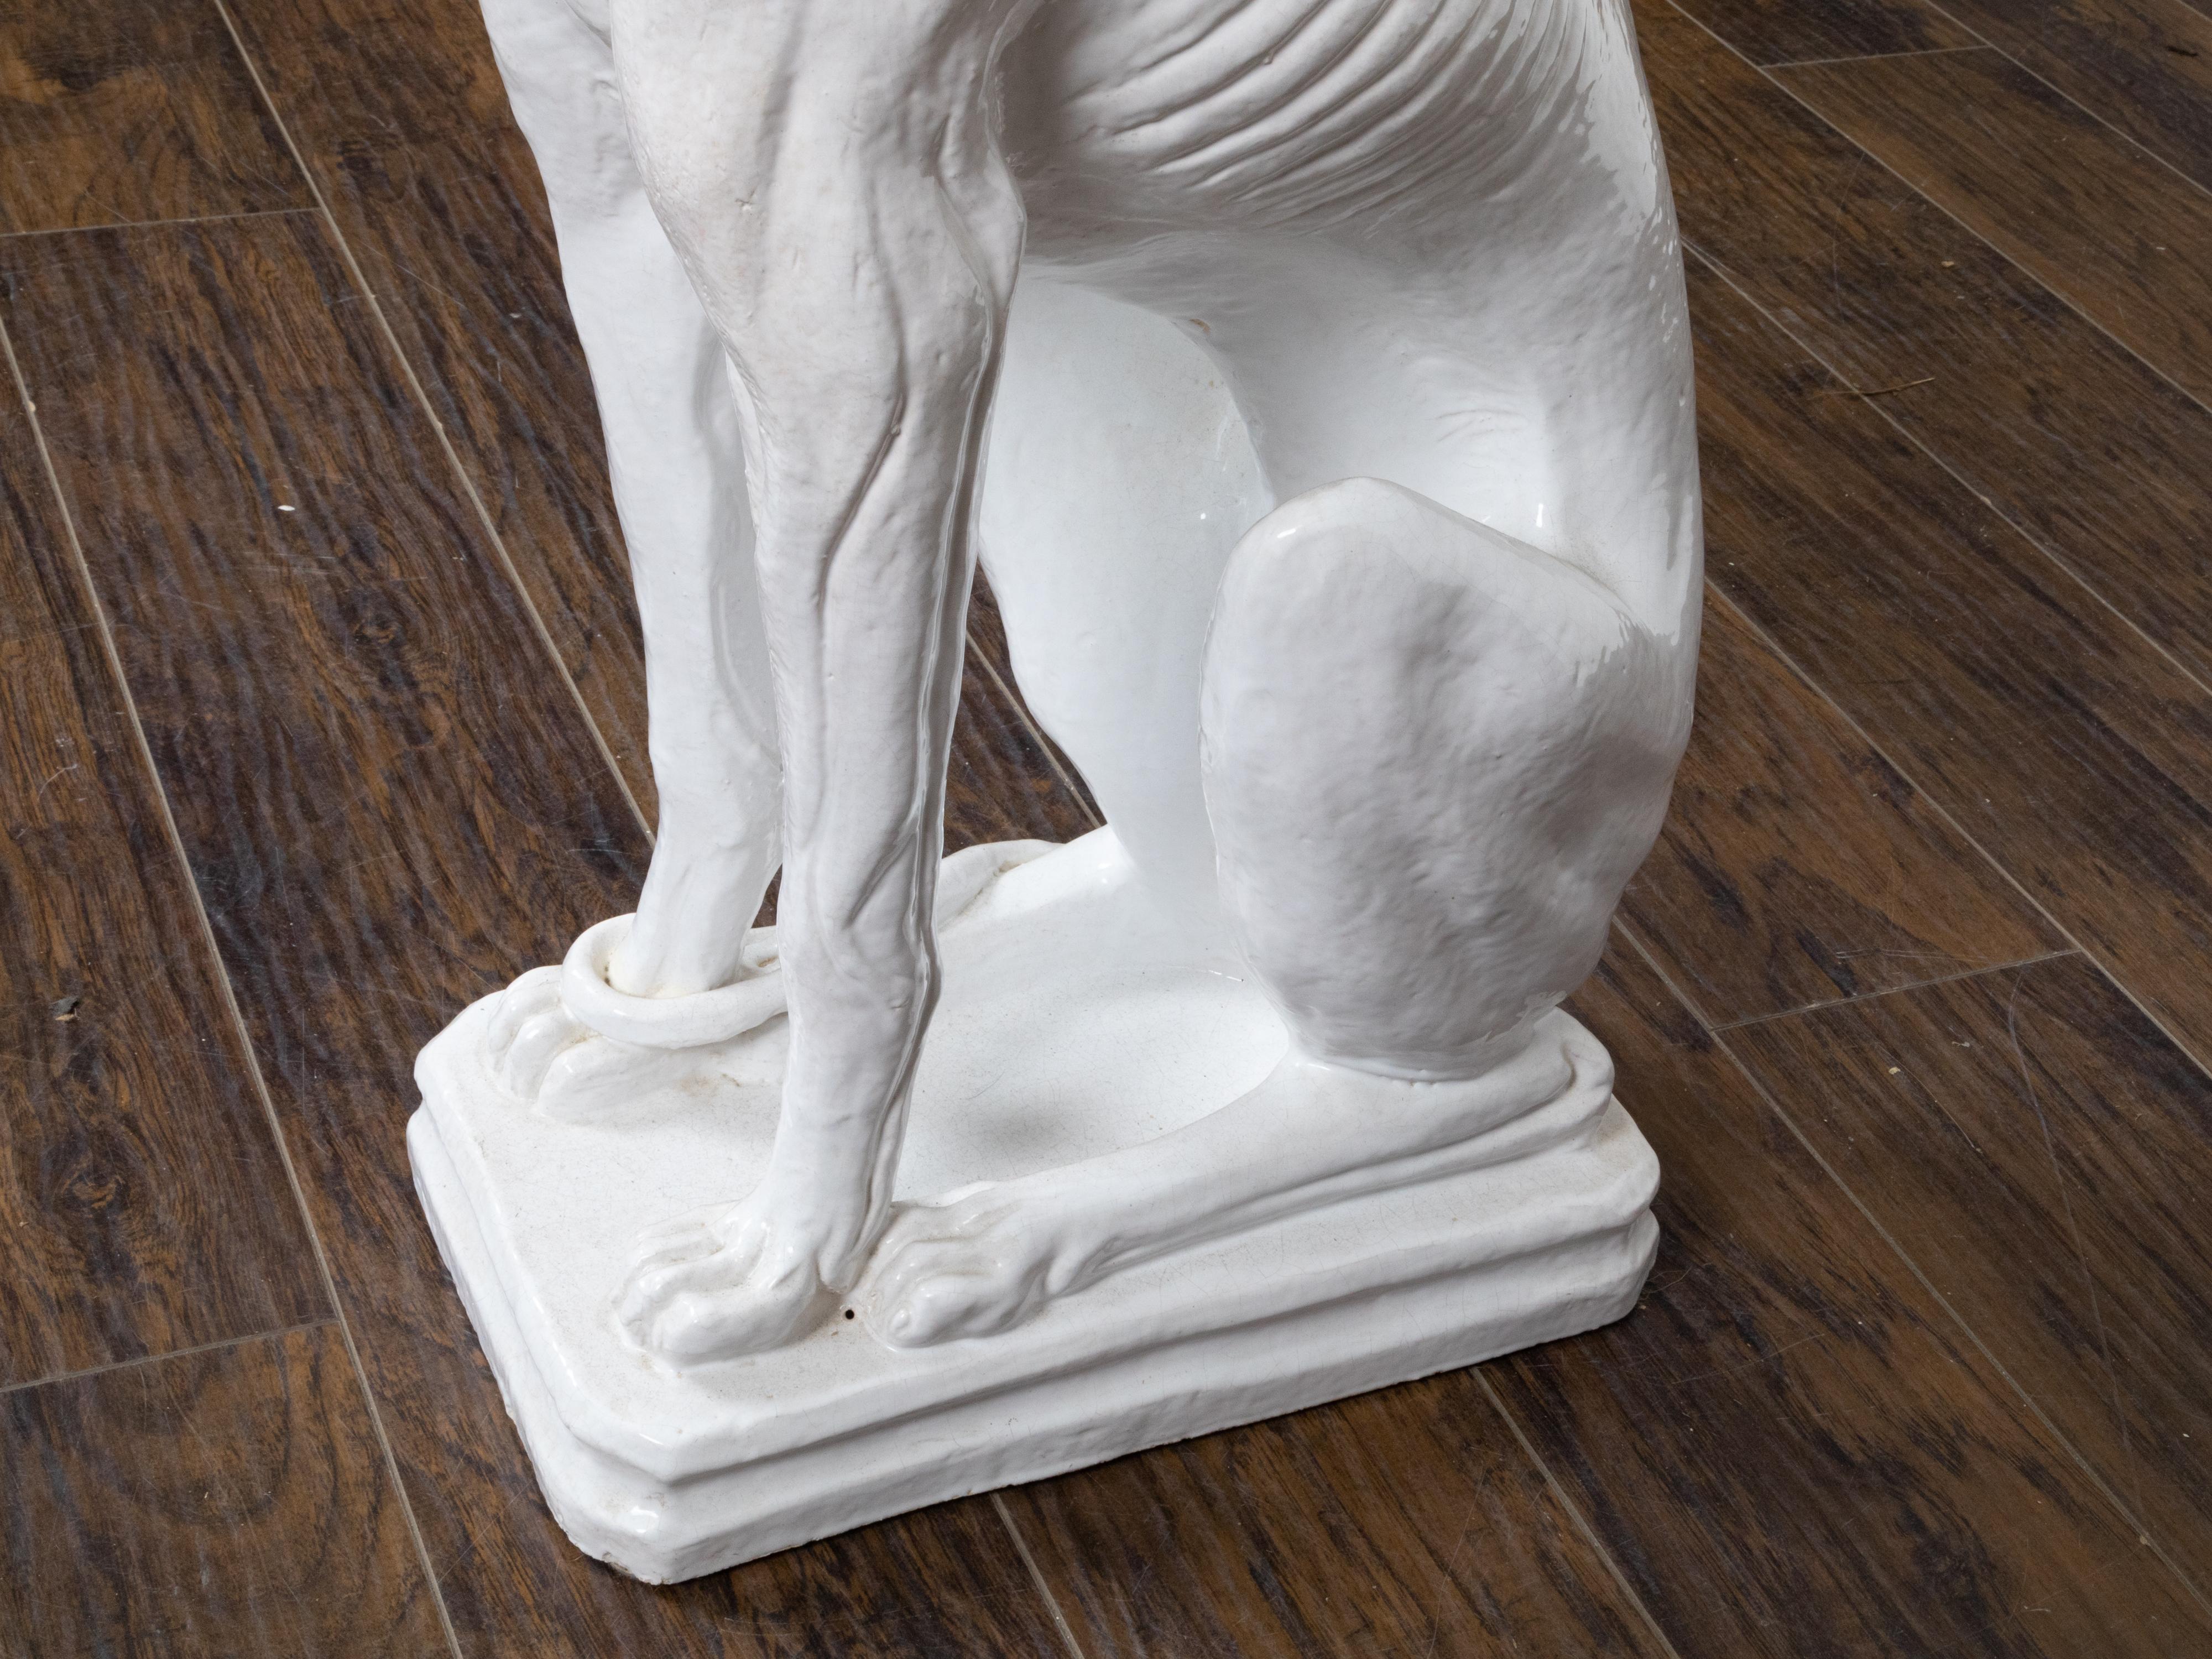 Midcentury Italian White Porcelain Sculpture of a Calm, Sitting Greyhound For Sale 1